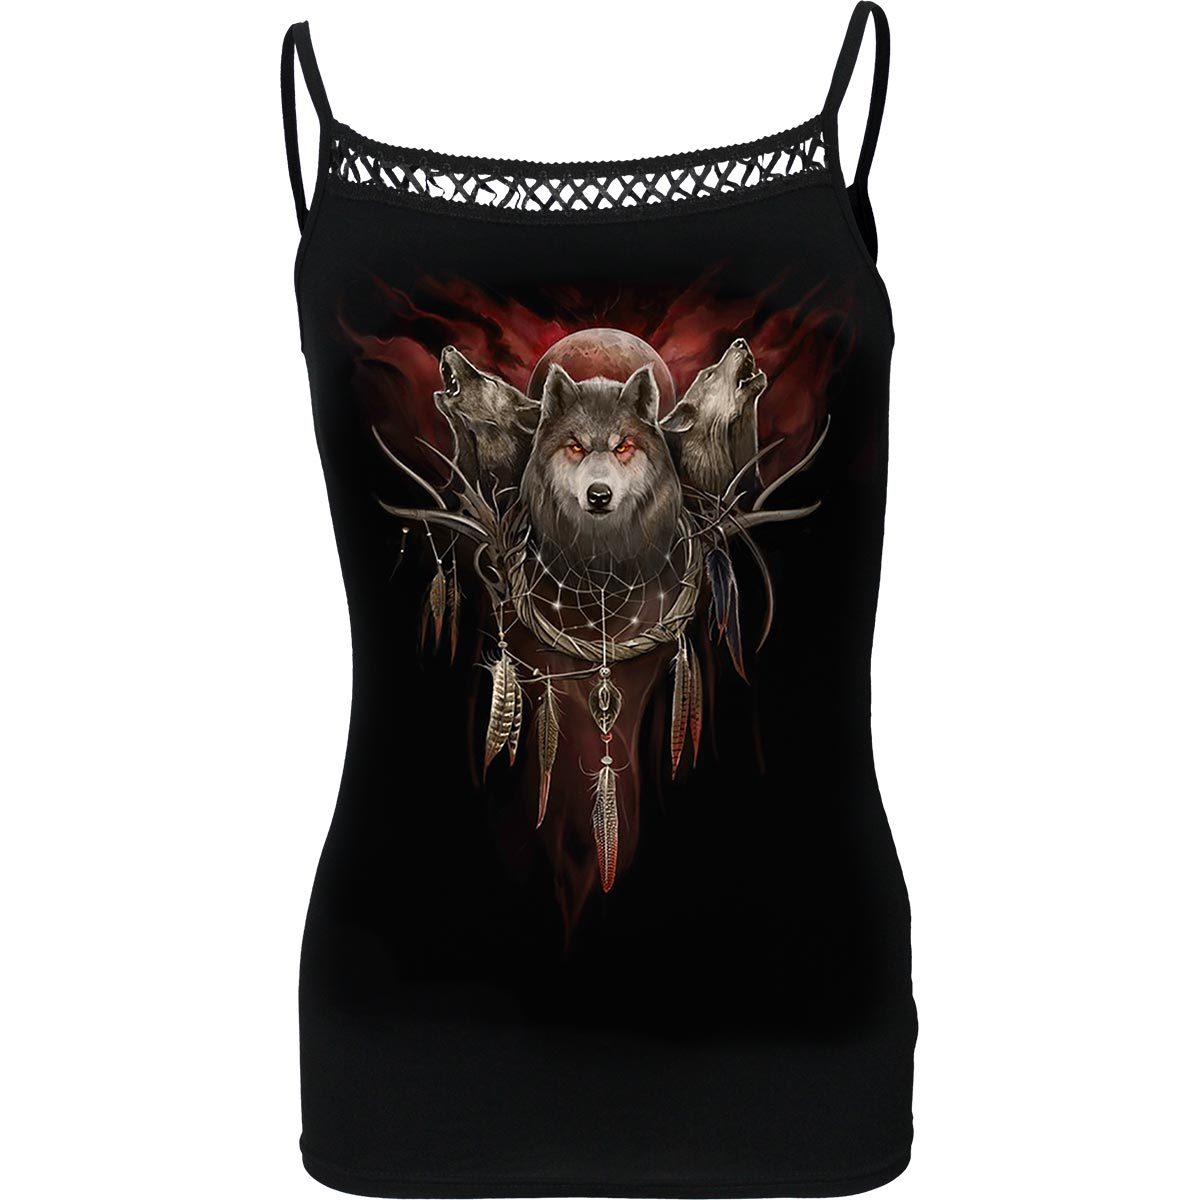 CRY OF THE WOLF - Cross Trim Camisole - Spiral USA